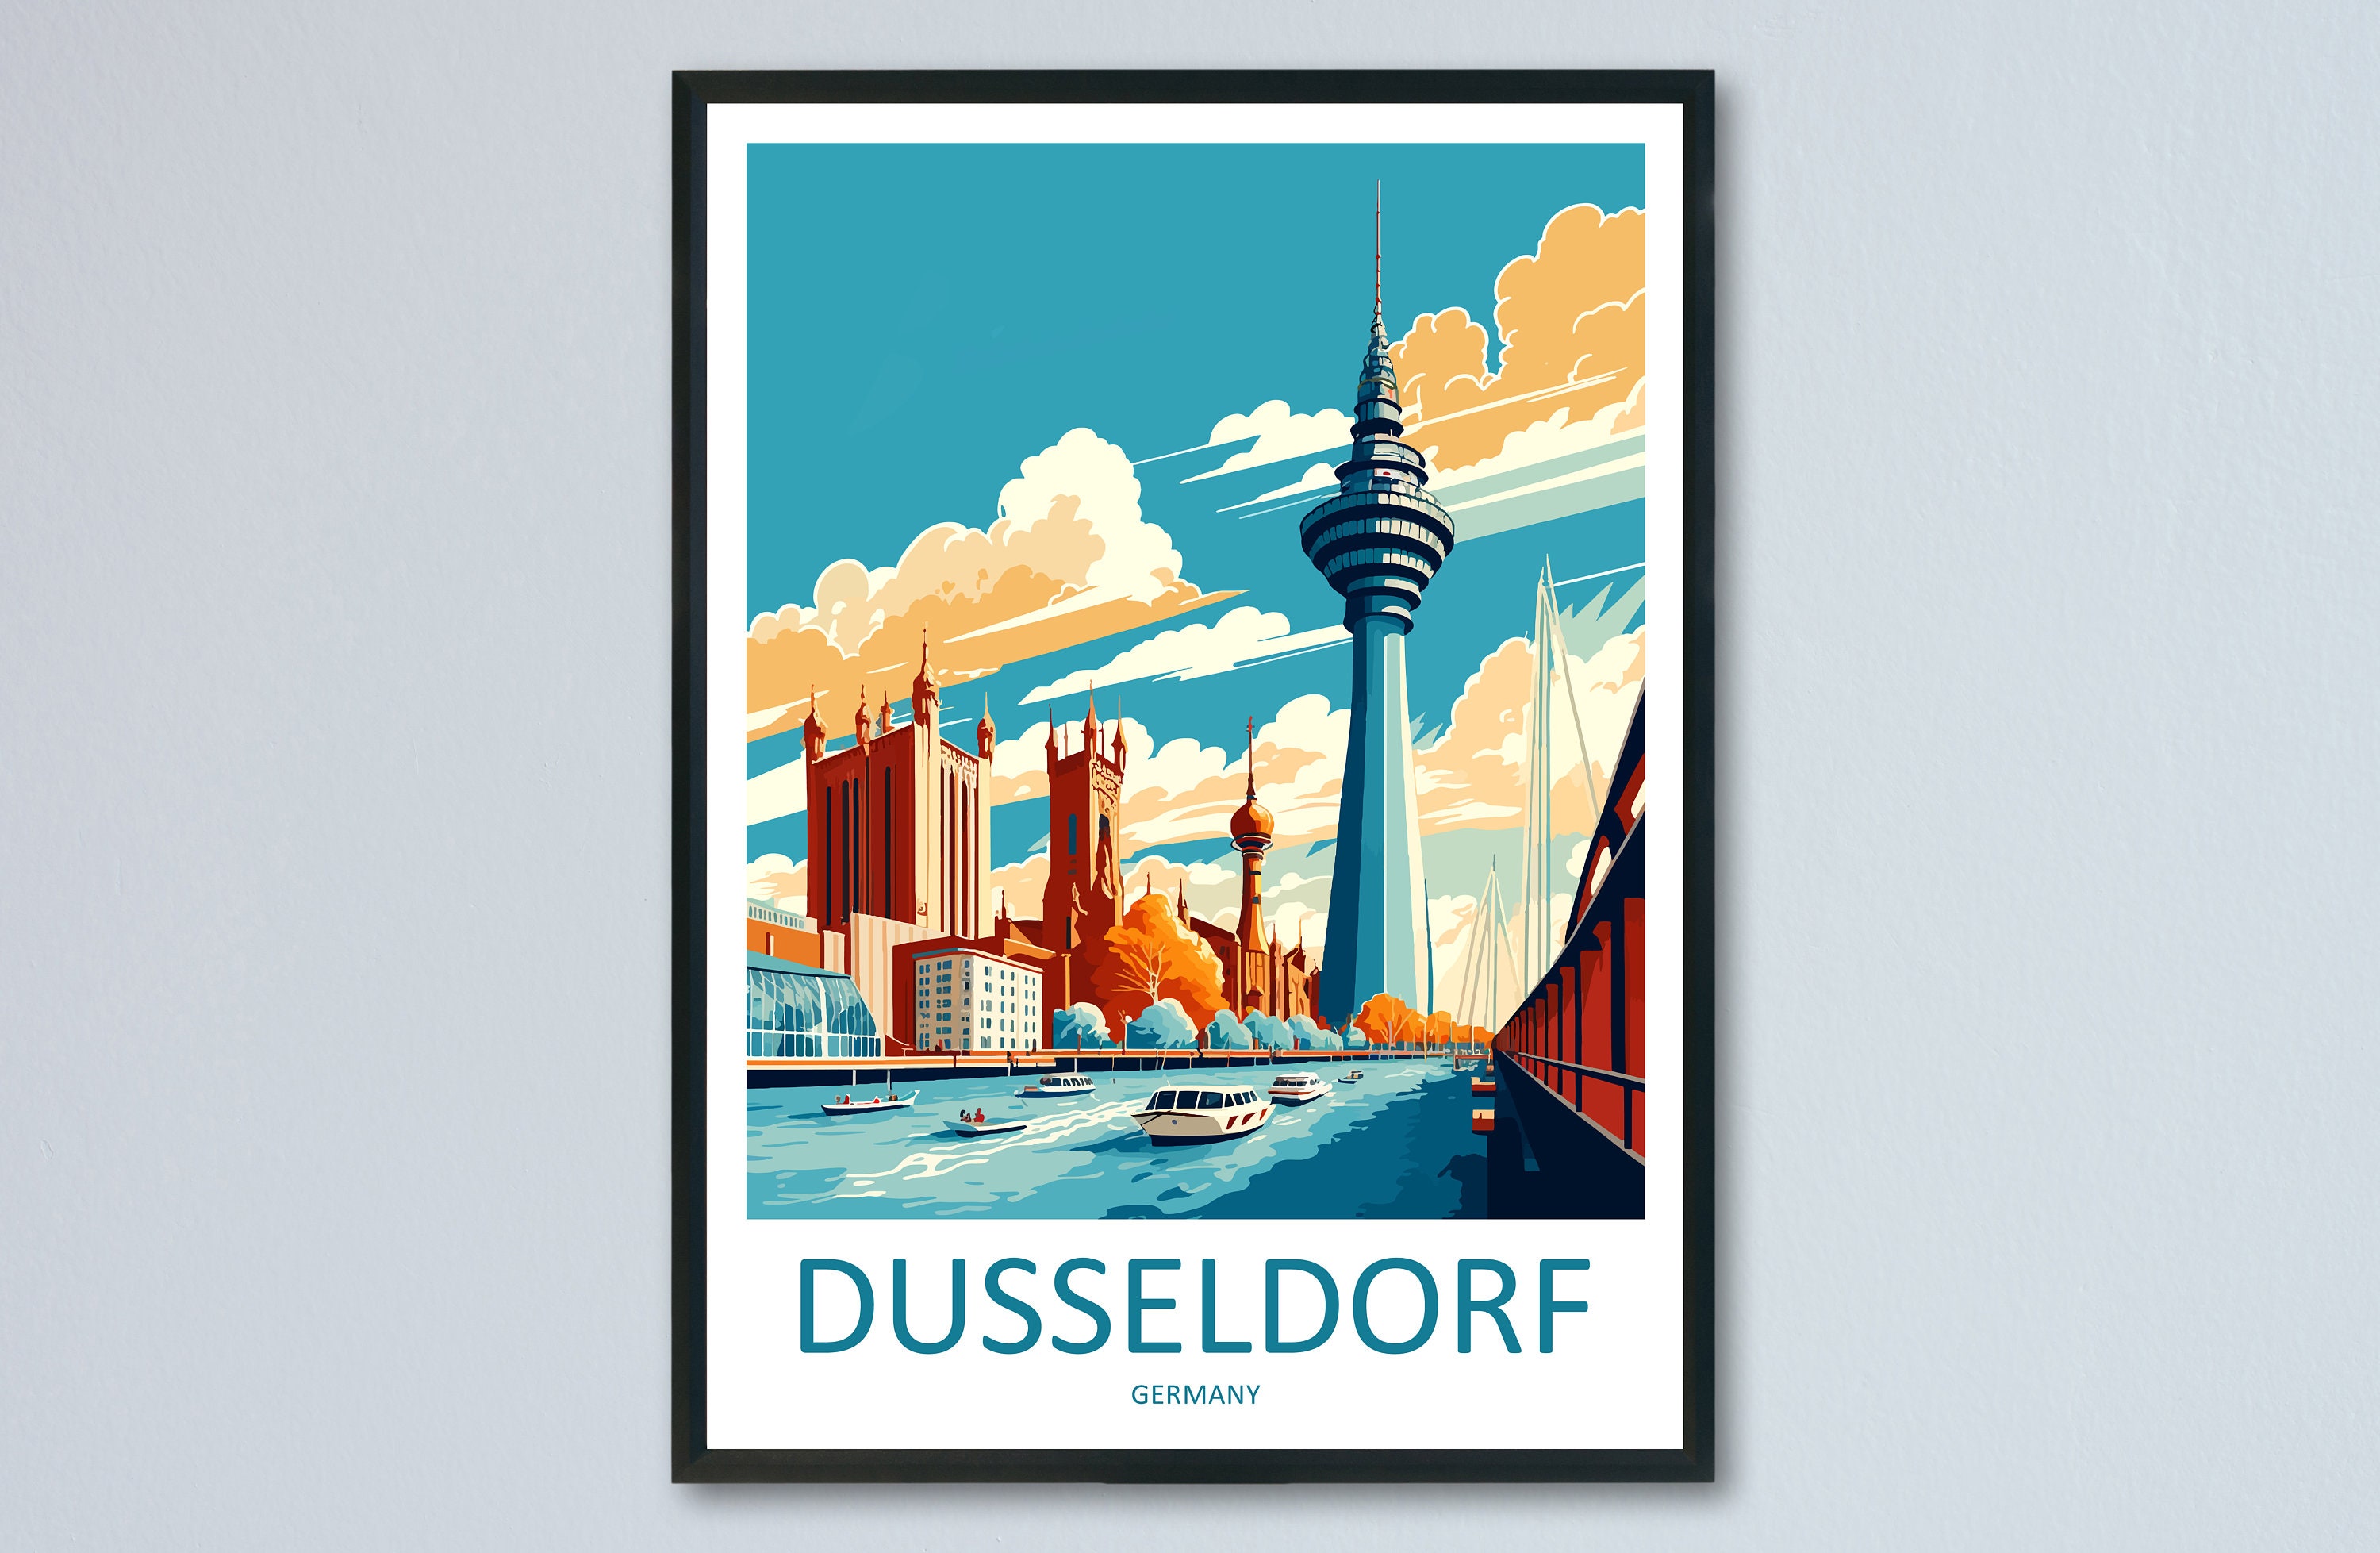 Gift Hanging Dusseldorf Décor Wall Wall Print Dusseldorf Travel Art Gift Gift - Home Lovers Travel Etsy Lover Germany Dusseldorf Dusseldorf Art Art